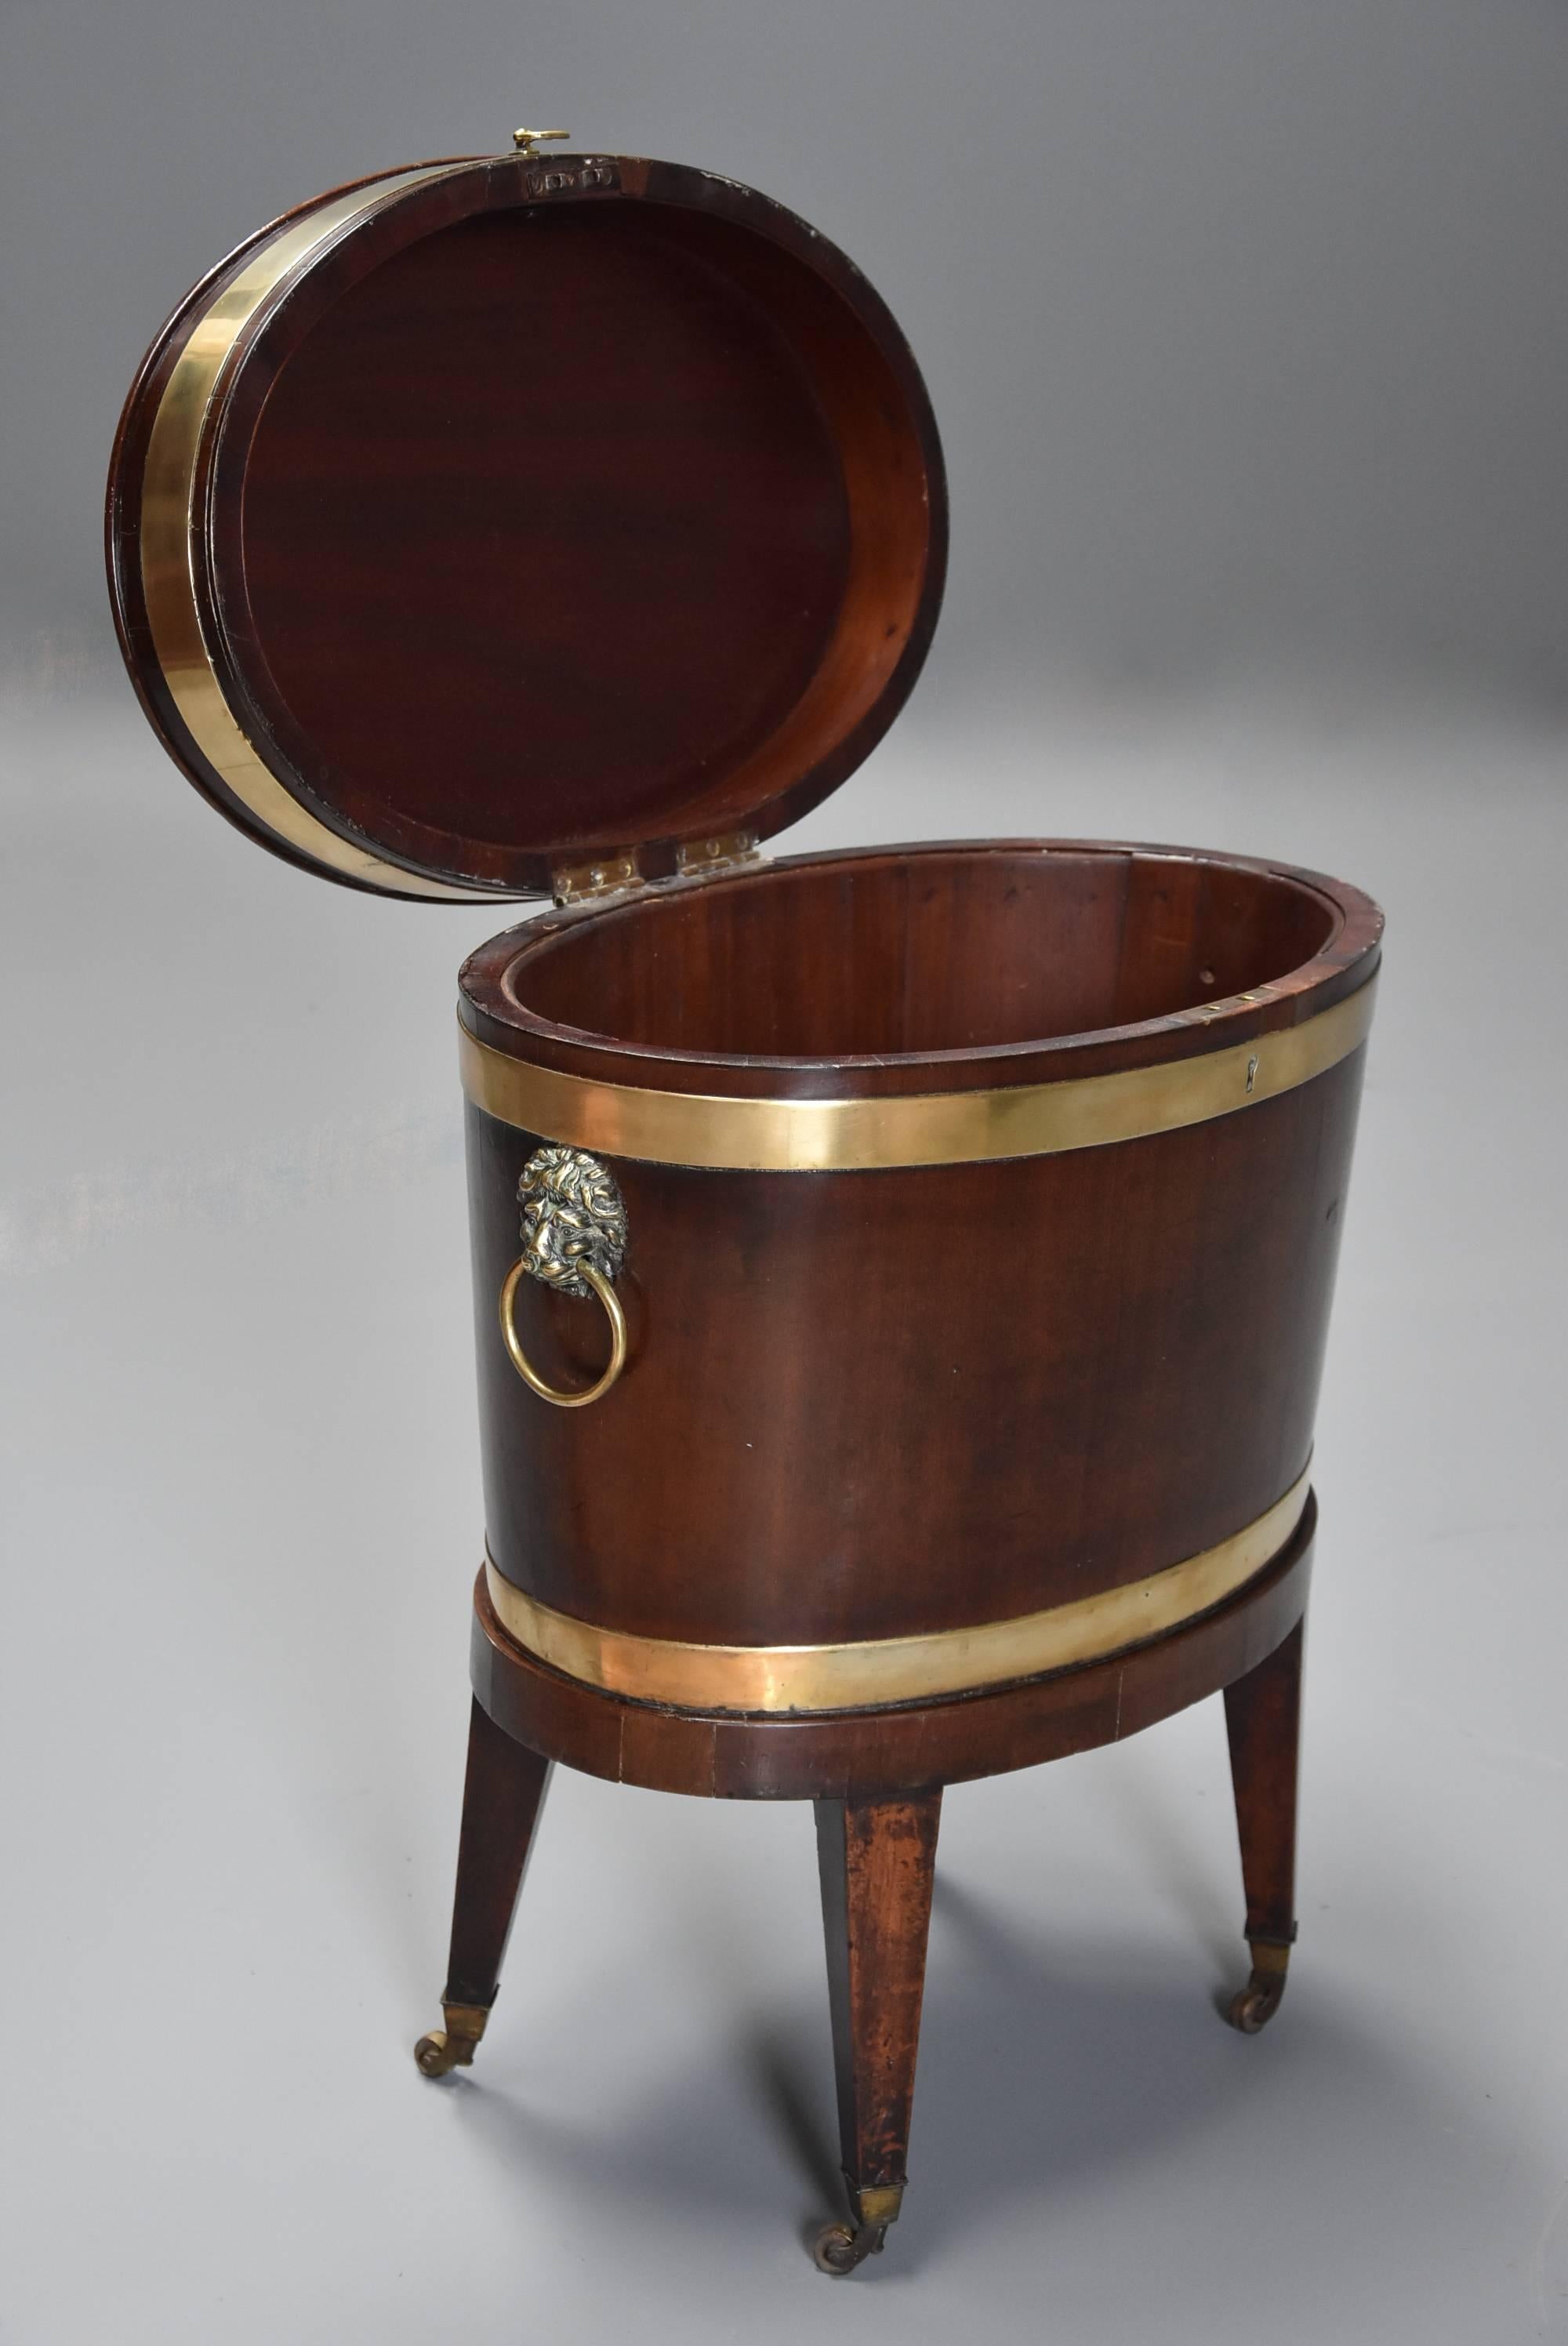 English Late 18th Century Mahogany and Brass Bound Oval Cellaret of Slender Proportion